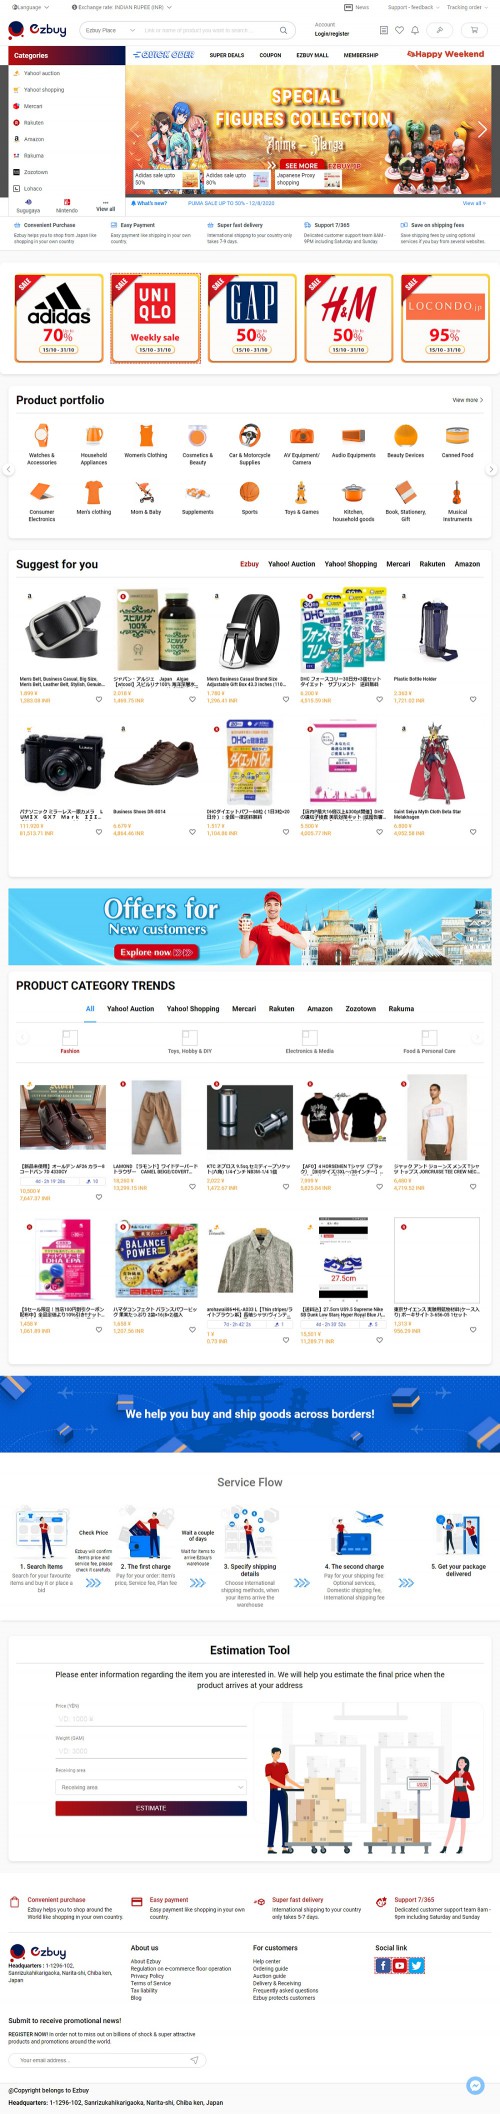 We provides the official Japanese goods purchase service, buying goods on Amazon, Rakuten, Mercari, and Japanese Auction on Yahoo Auction. Shipping official channel, prestige, cheap price, goods as committed, ensure fast shipping to around the world only from 7 days.How to buy from japan online, Purchase from japan, Shopping mall japan proxy, Buy japanese goods online, Buy japanese goods, Buy japanese product online, Buy japanese items online, Buy japanese items and Buy used japanese items. 

https://ezbuy.jp/ 

#orderfromjapan #howtobuyfromjapan #buyjapaneseproductsonline #bestproxyshoppingjapan #japaneseproxybuyingservice #Buyingfromjapanshiptousa #PurchasingJapaneseproduct #howtobuyproductfromjapan #proxyshippingservicejapan #orderfromjapanonline #buyfromjapanonline #howtobuyfromjapanonline #purchasefromjapan